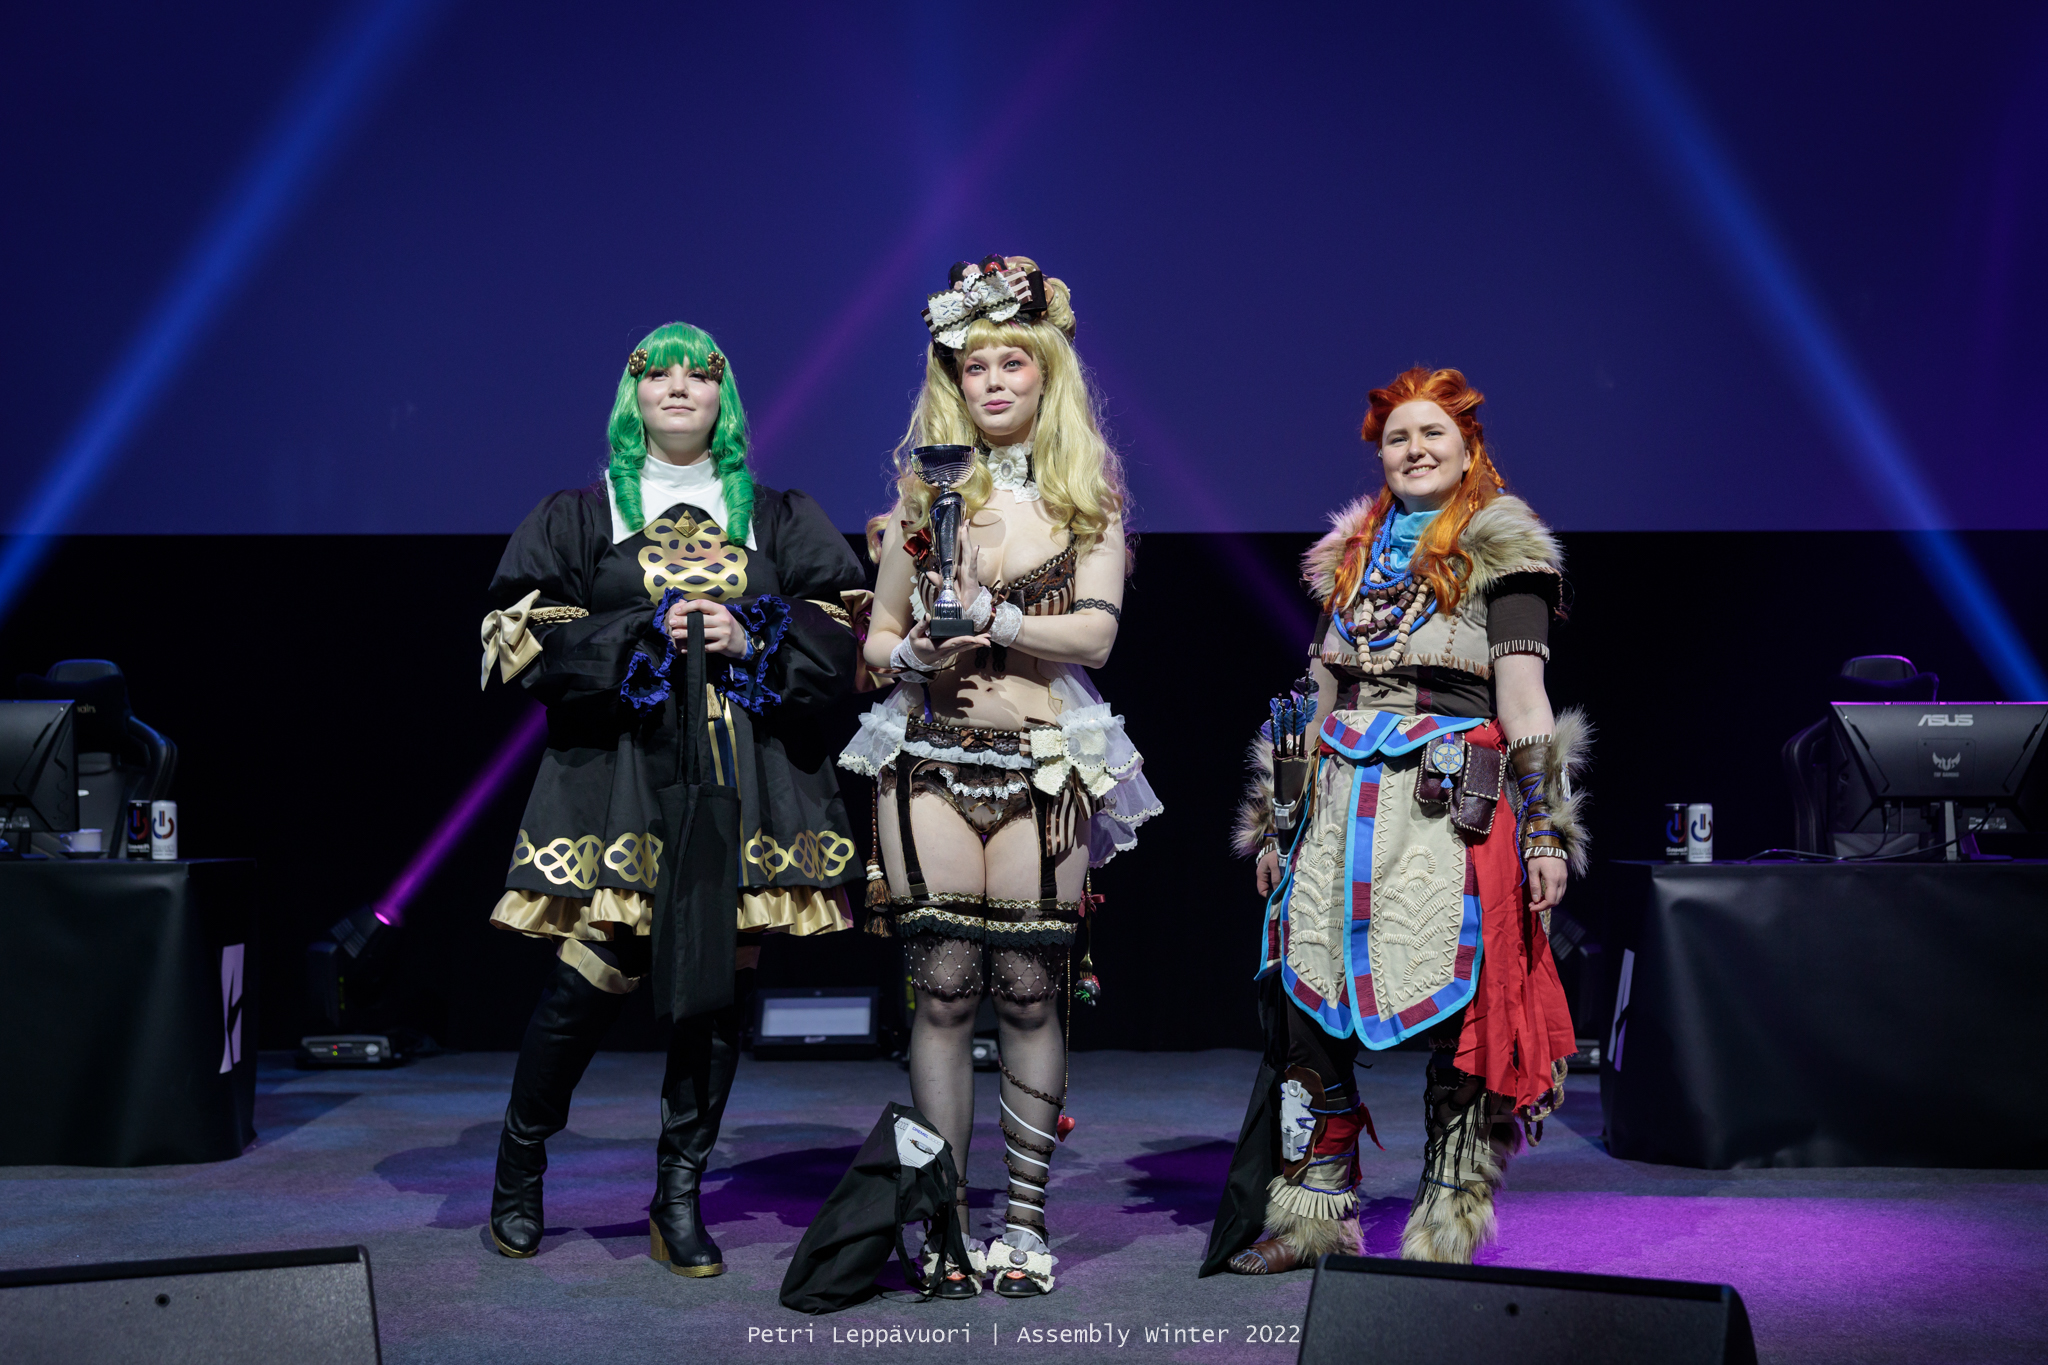 Cosplay winners on stage at ASSEMBLY Winter'22